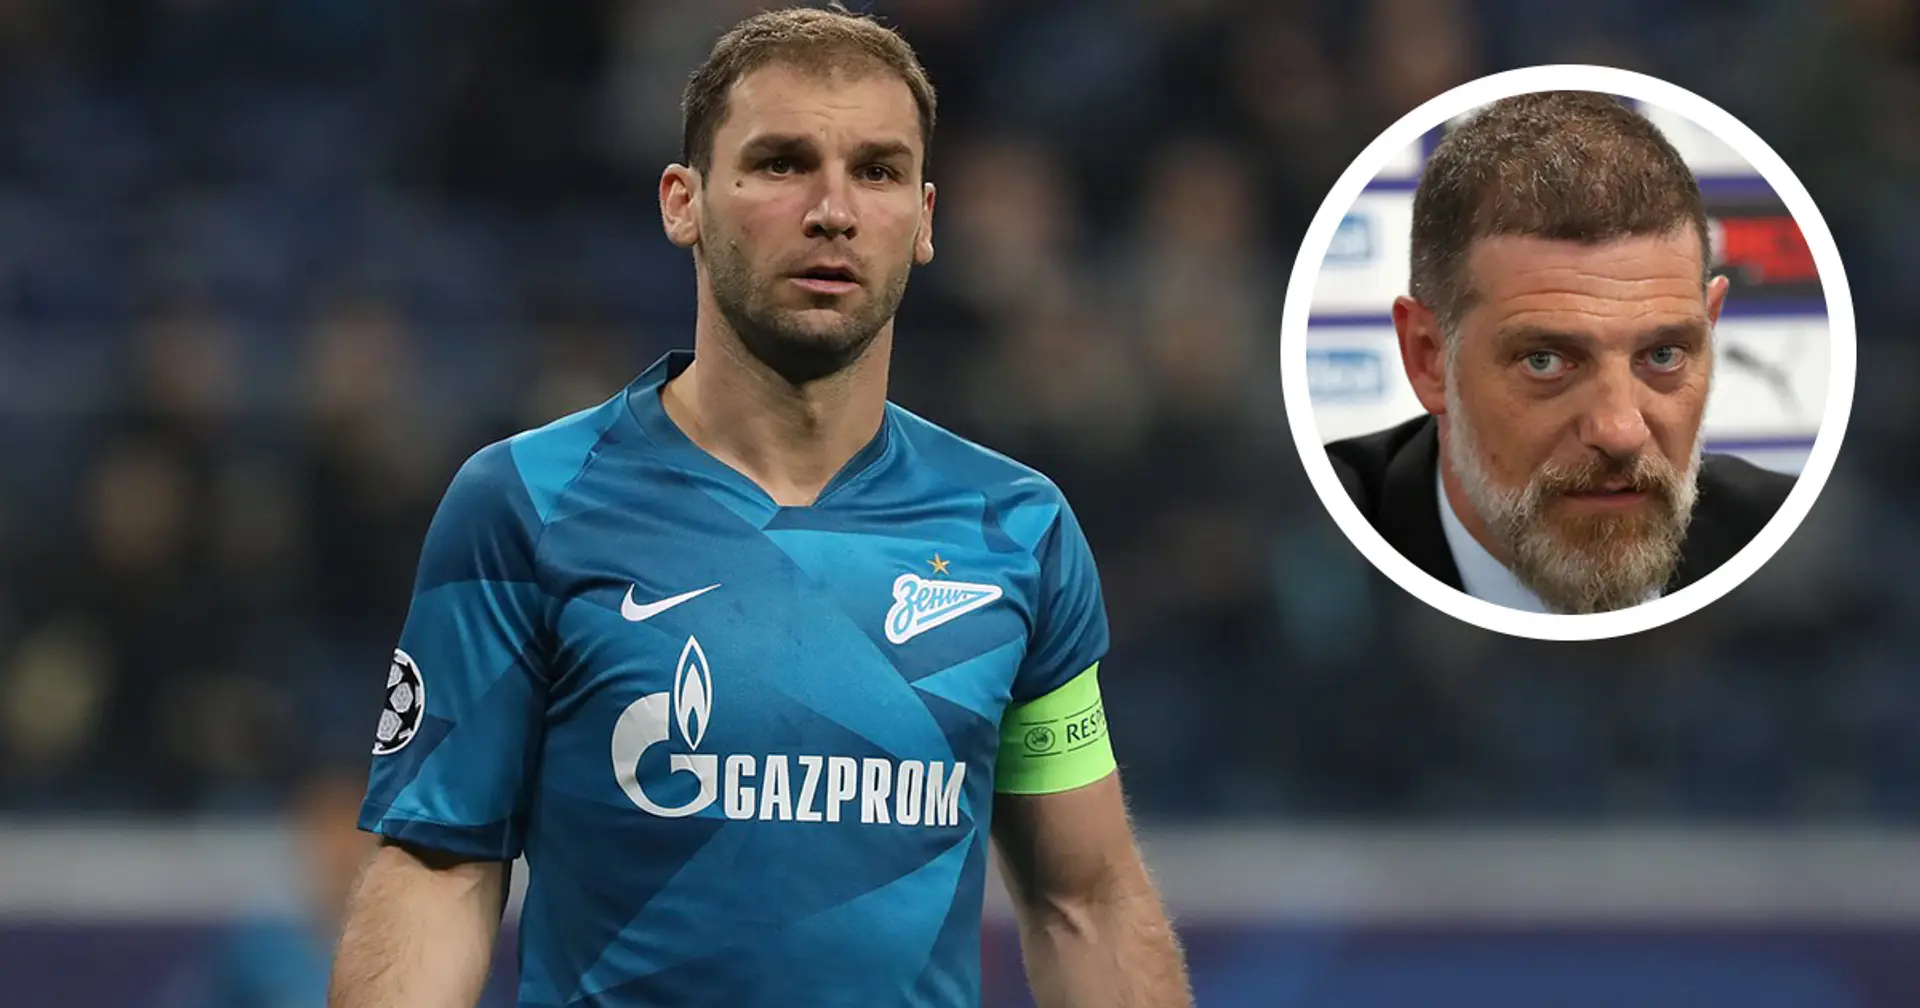 Chelsea legend Branislav Ivanovic will come back to Premier League as West Brom boss Bilic expects deal to be done 'in a matter of hours'